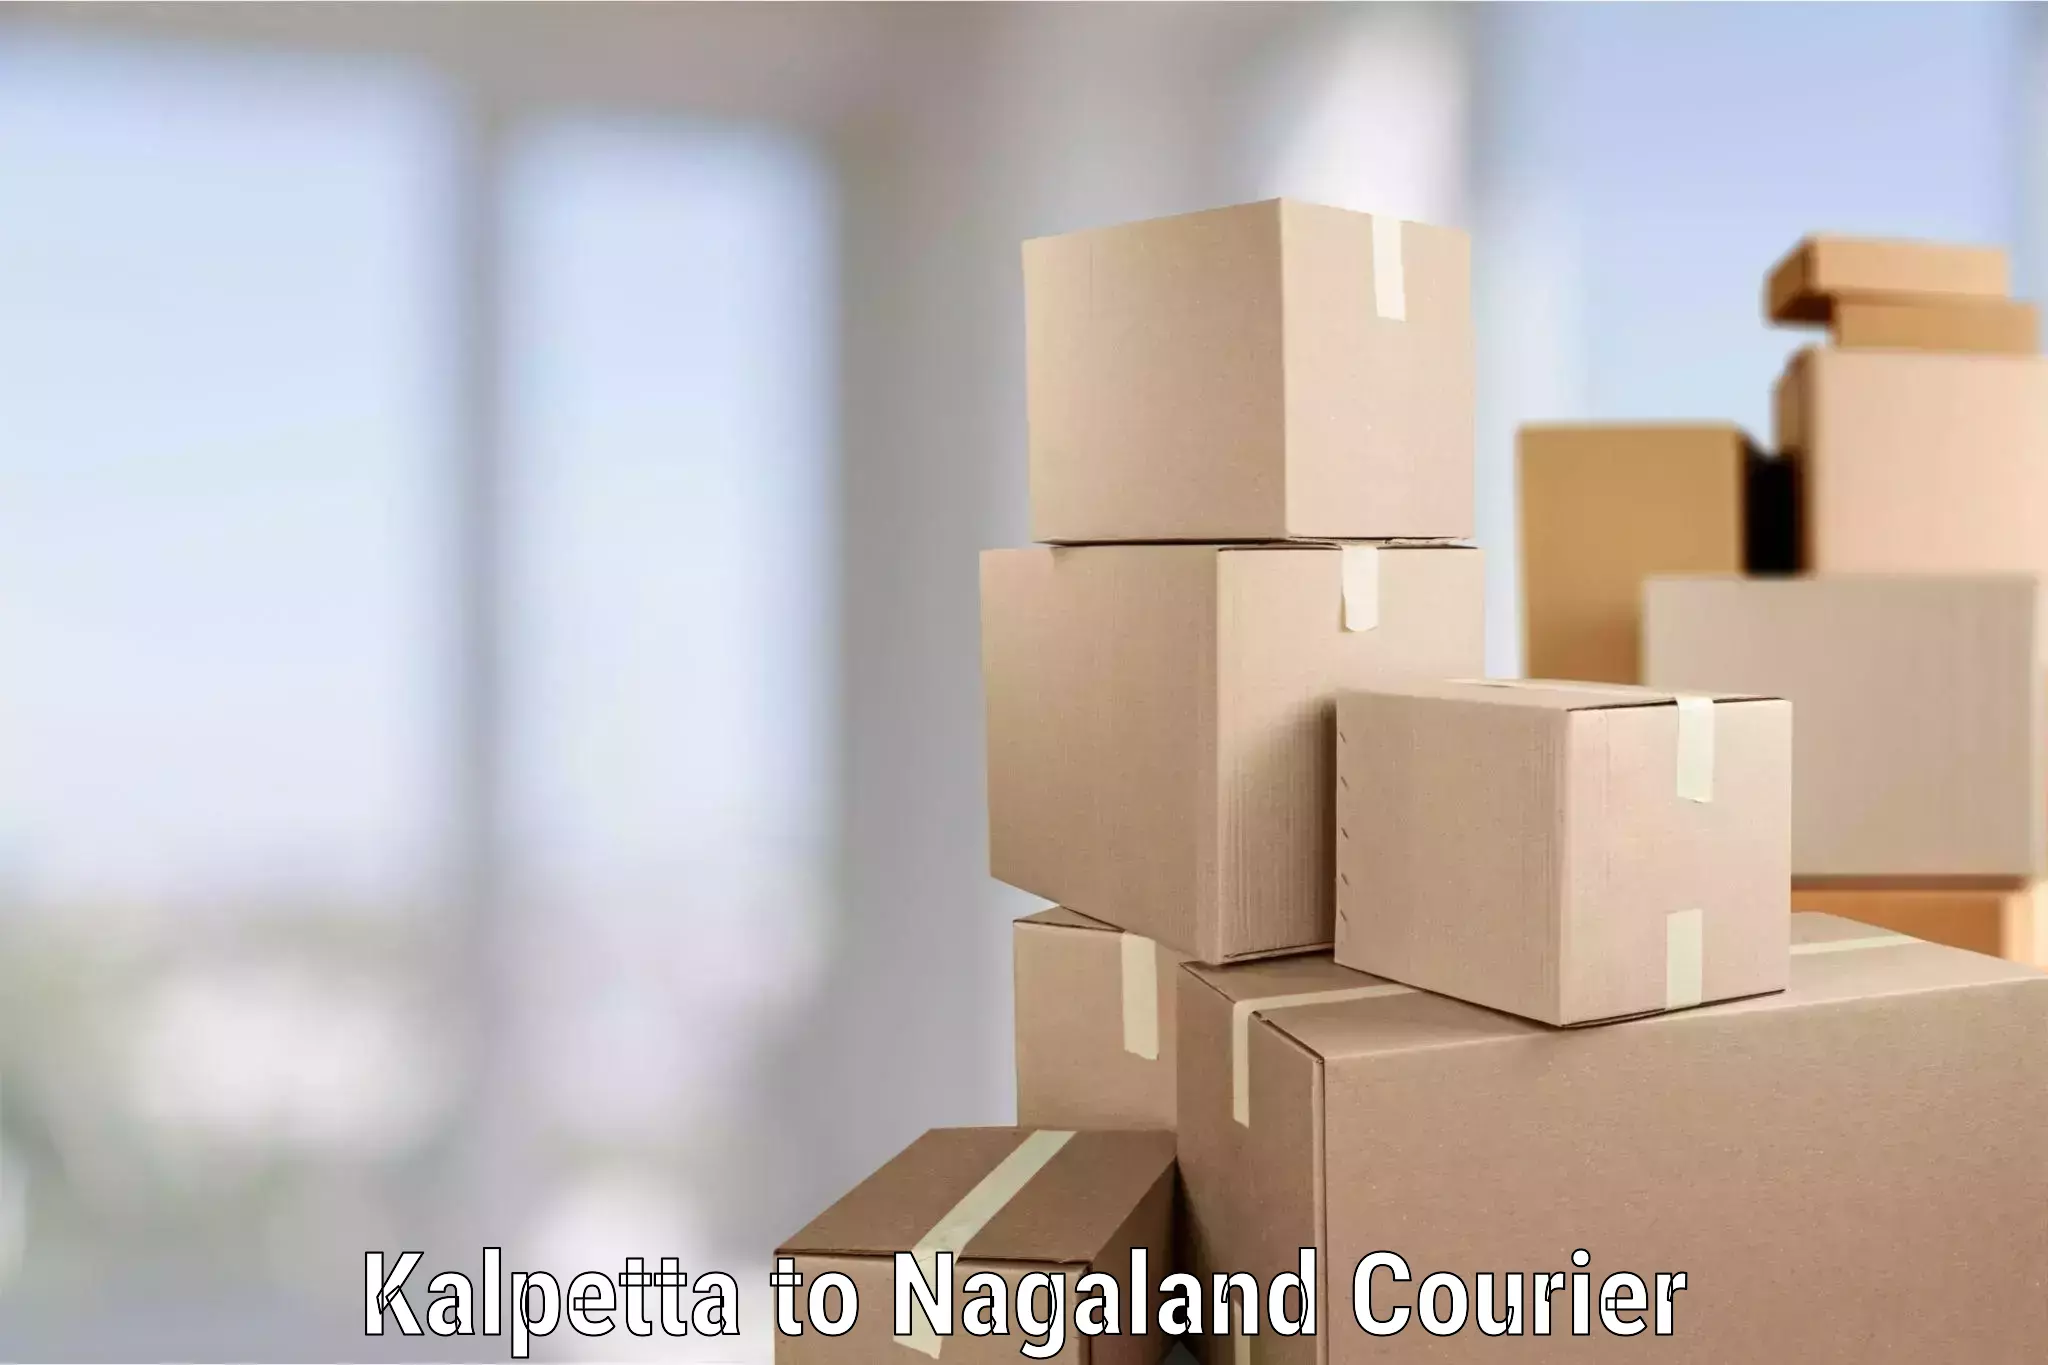 Moving and packing experts Kalpetta to Nagaland